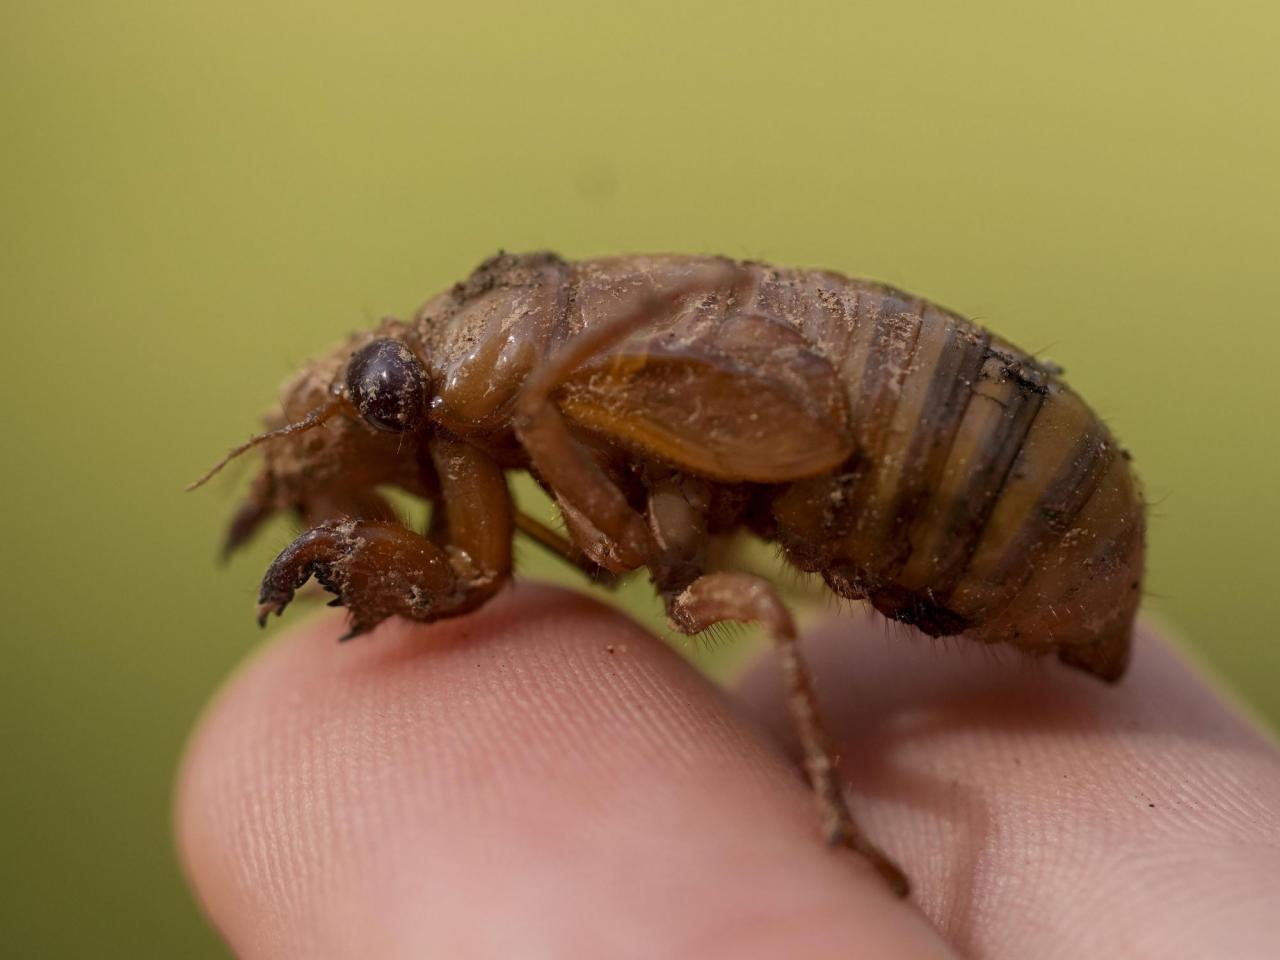 Invaders from underground are coming in cicada-geddon. It's the biggest bug emergence in centuries